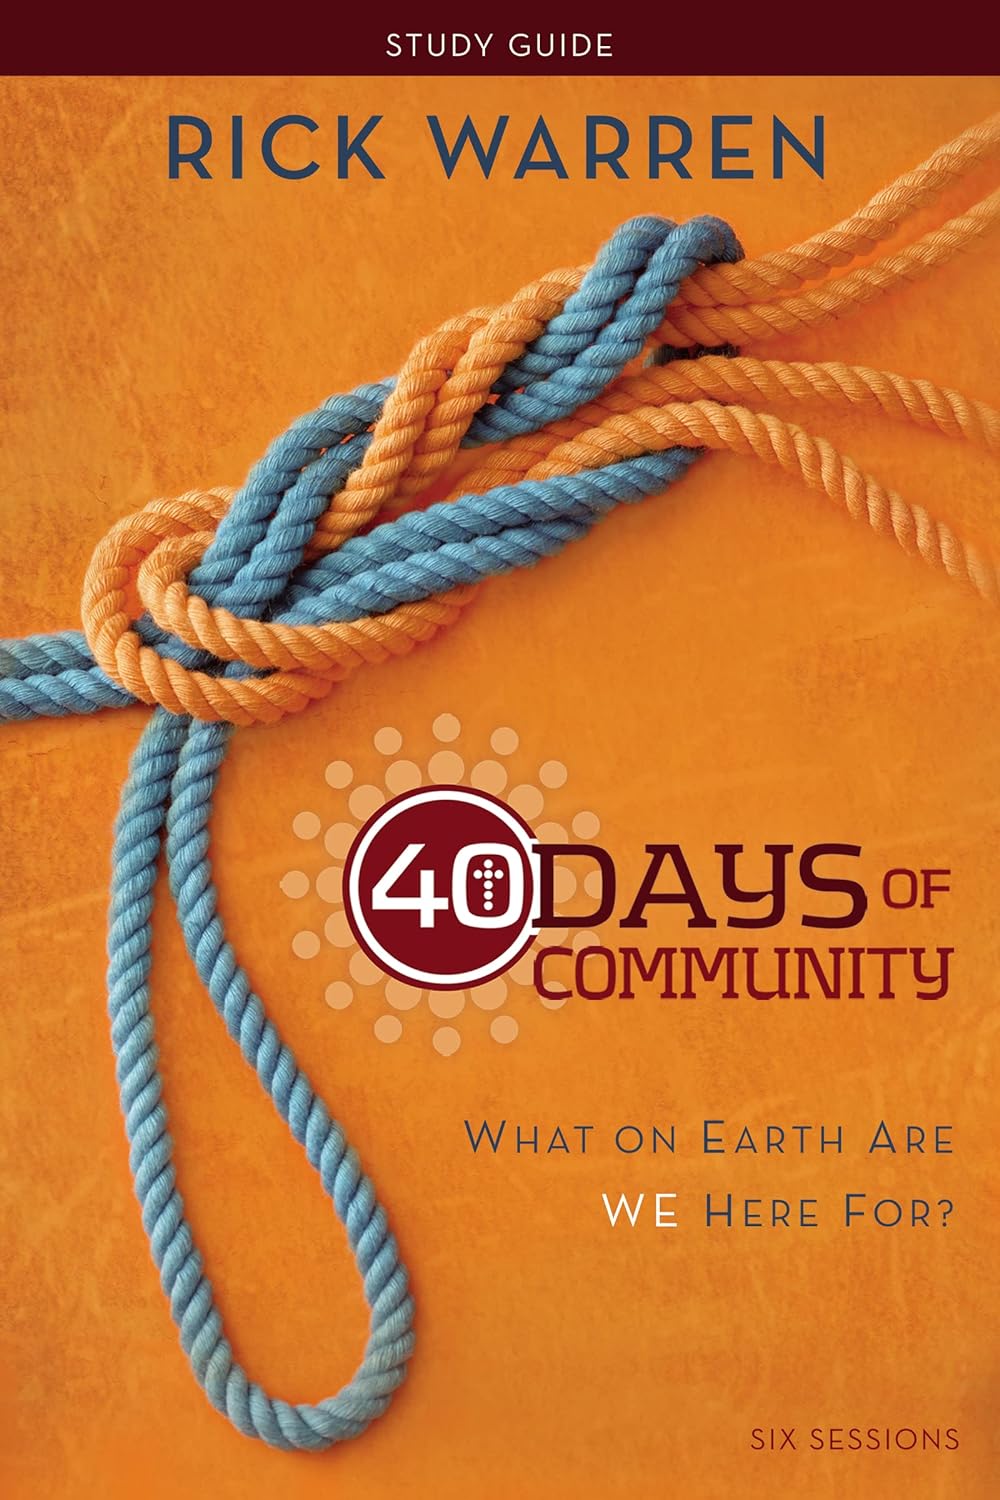 40 Days of Community Bible Study Guide: What on Earth Are We Here For? (Study Guide) - CA Corrections Book Store